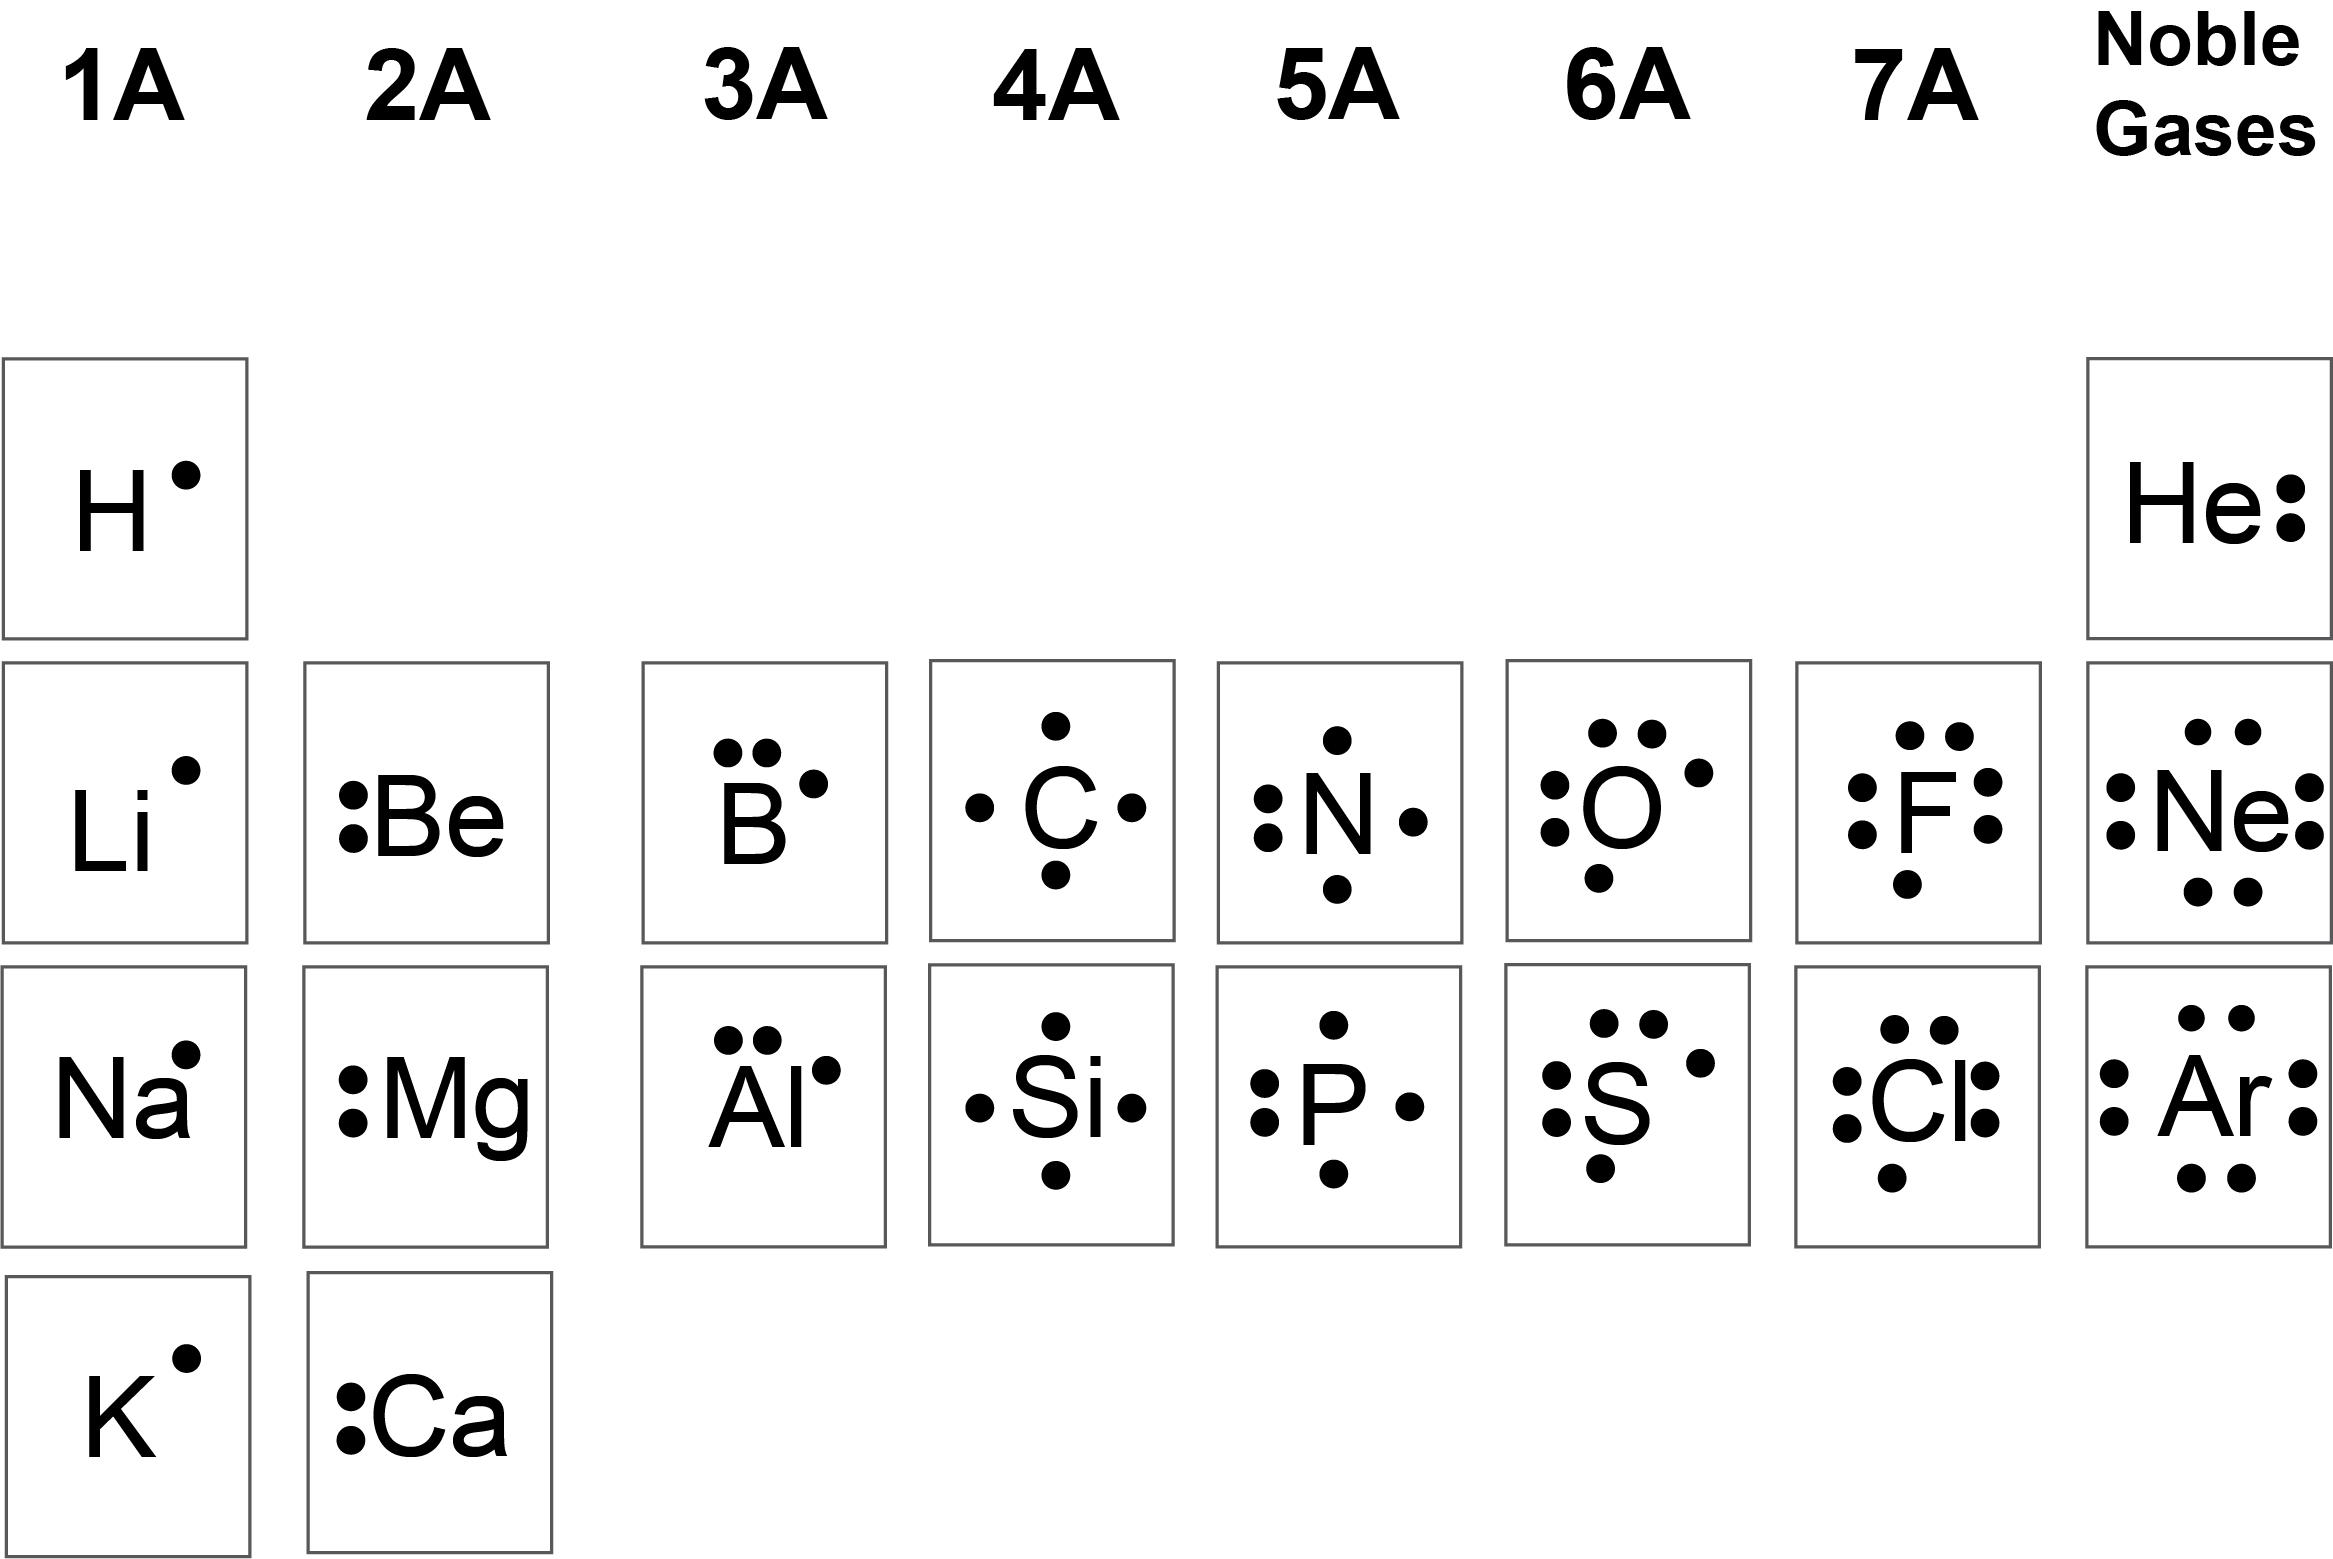 Lewis symbols depict the number of valence electrons for each group within the periodic table for the first 20 elements. The Lewis structuresare depicted as dots representing the valence electrons within groups 1A-7A, respectively.